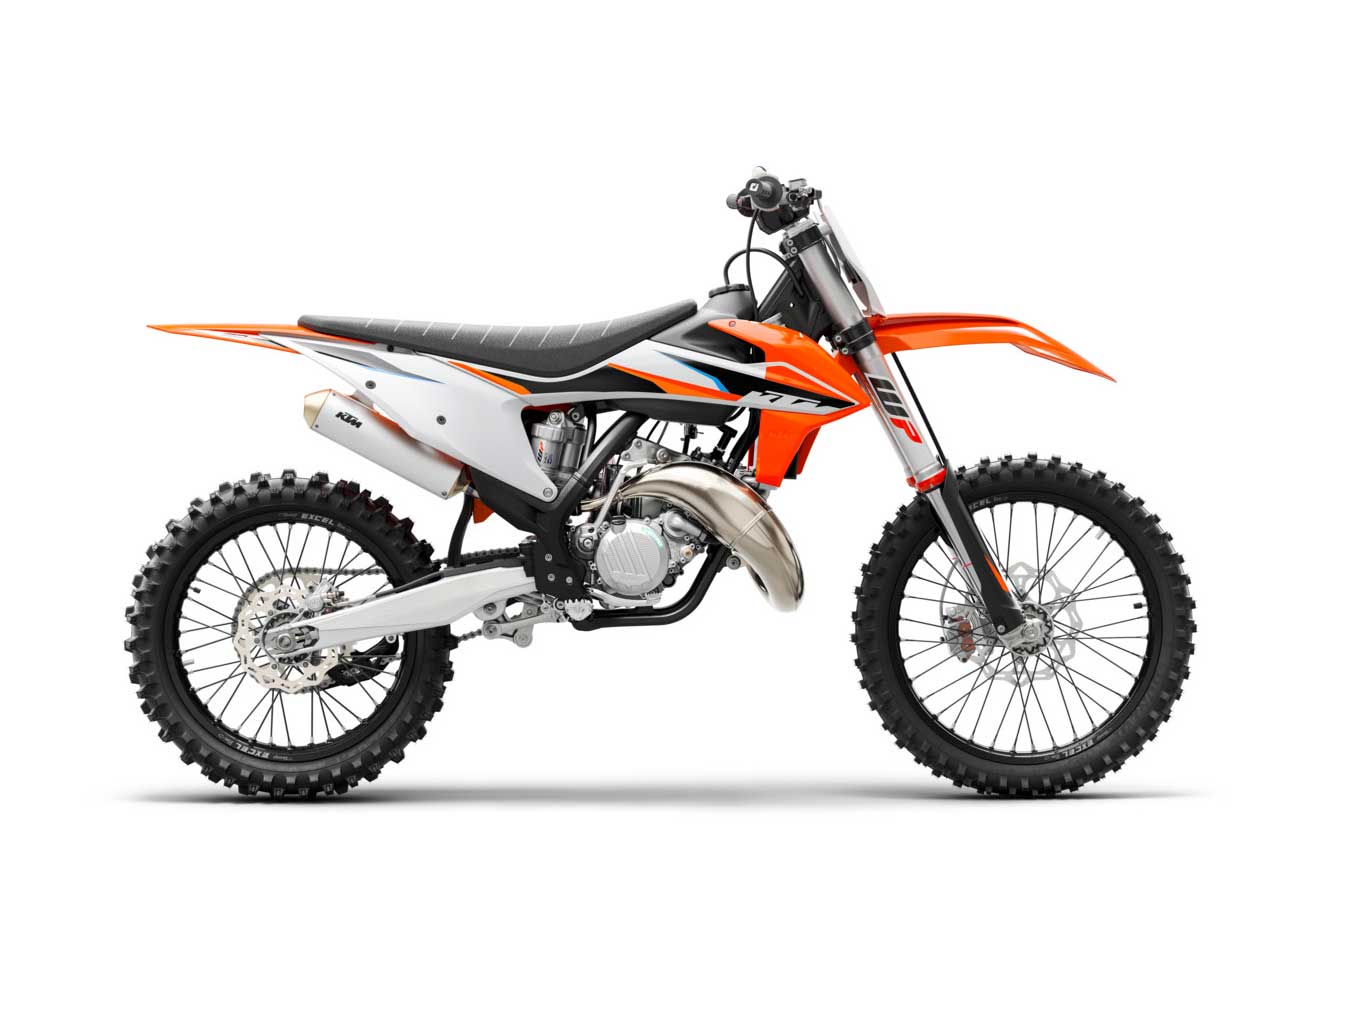 Having Fun With Small Bikes—150Cc Dirt Bikes For Sale This Year | Dirt Rider